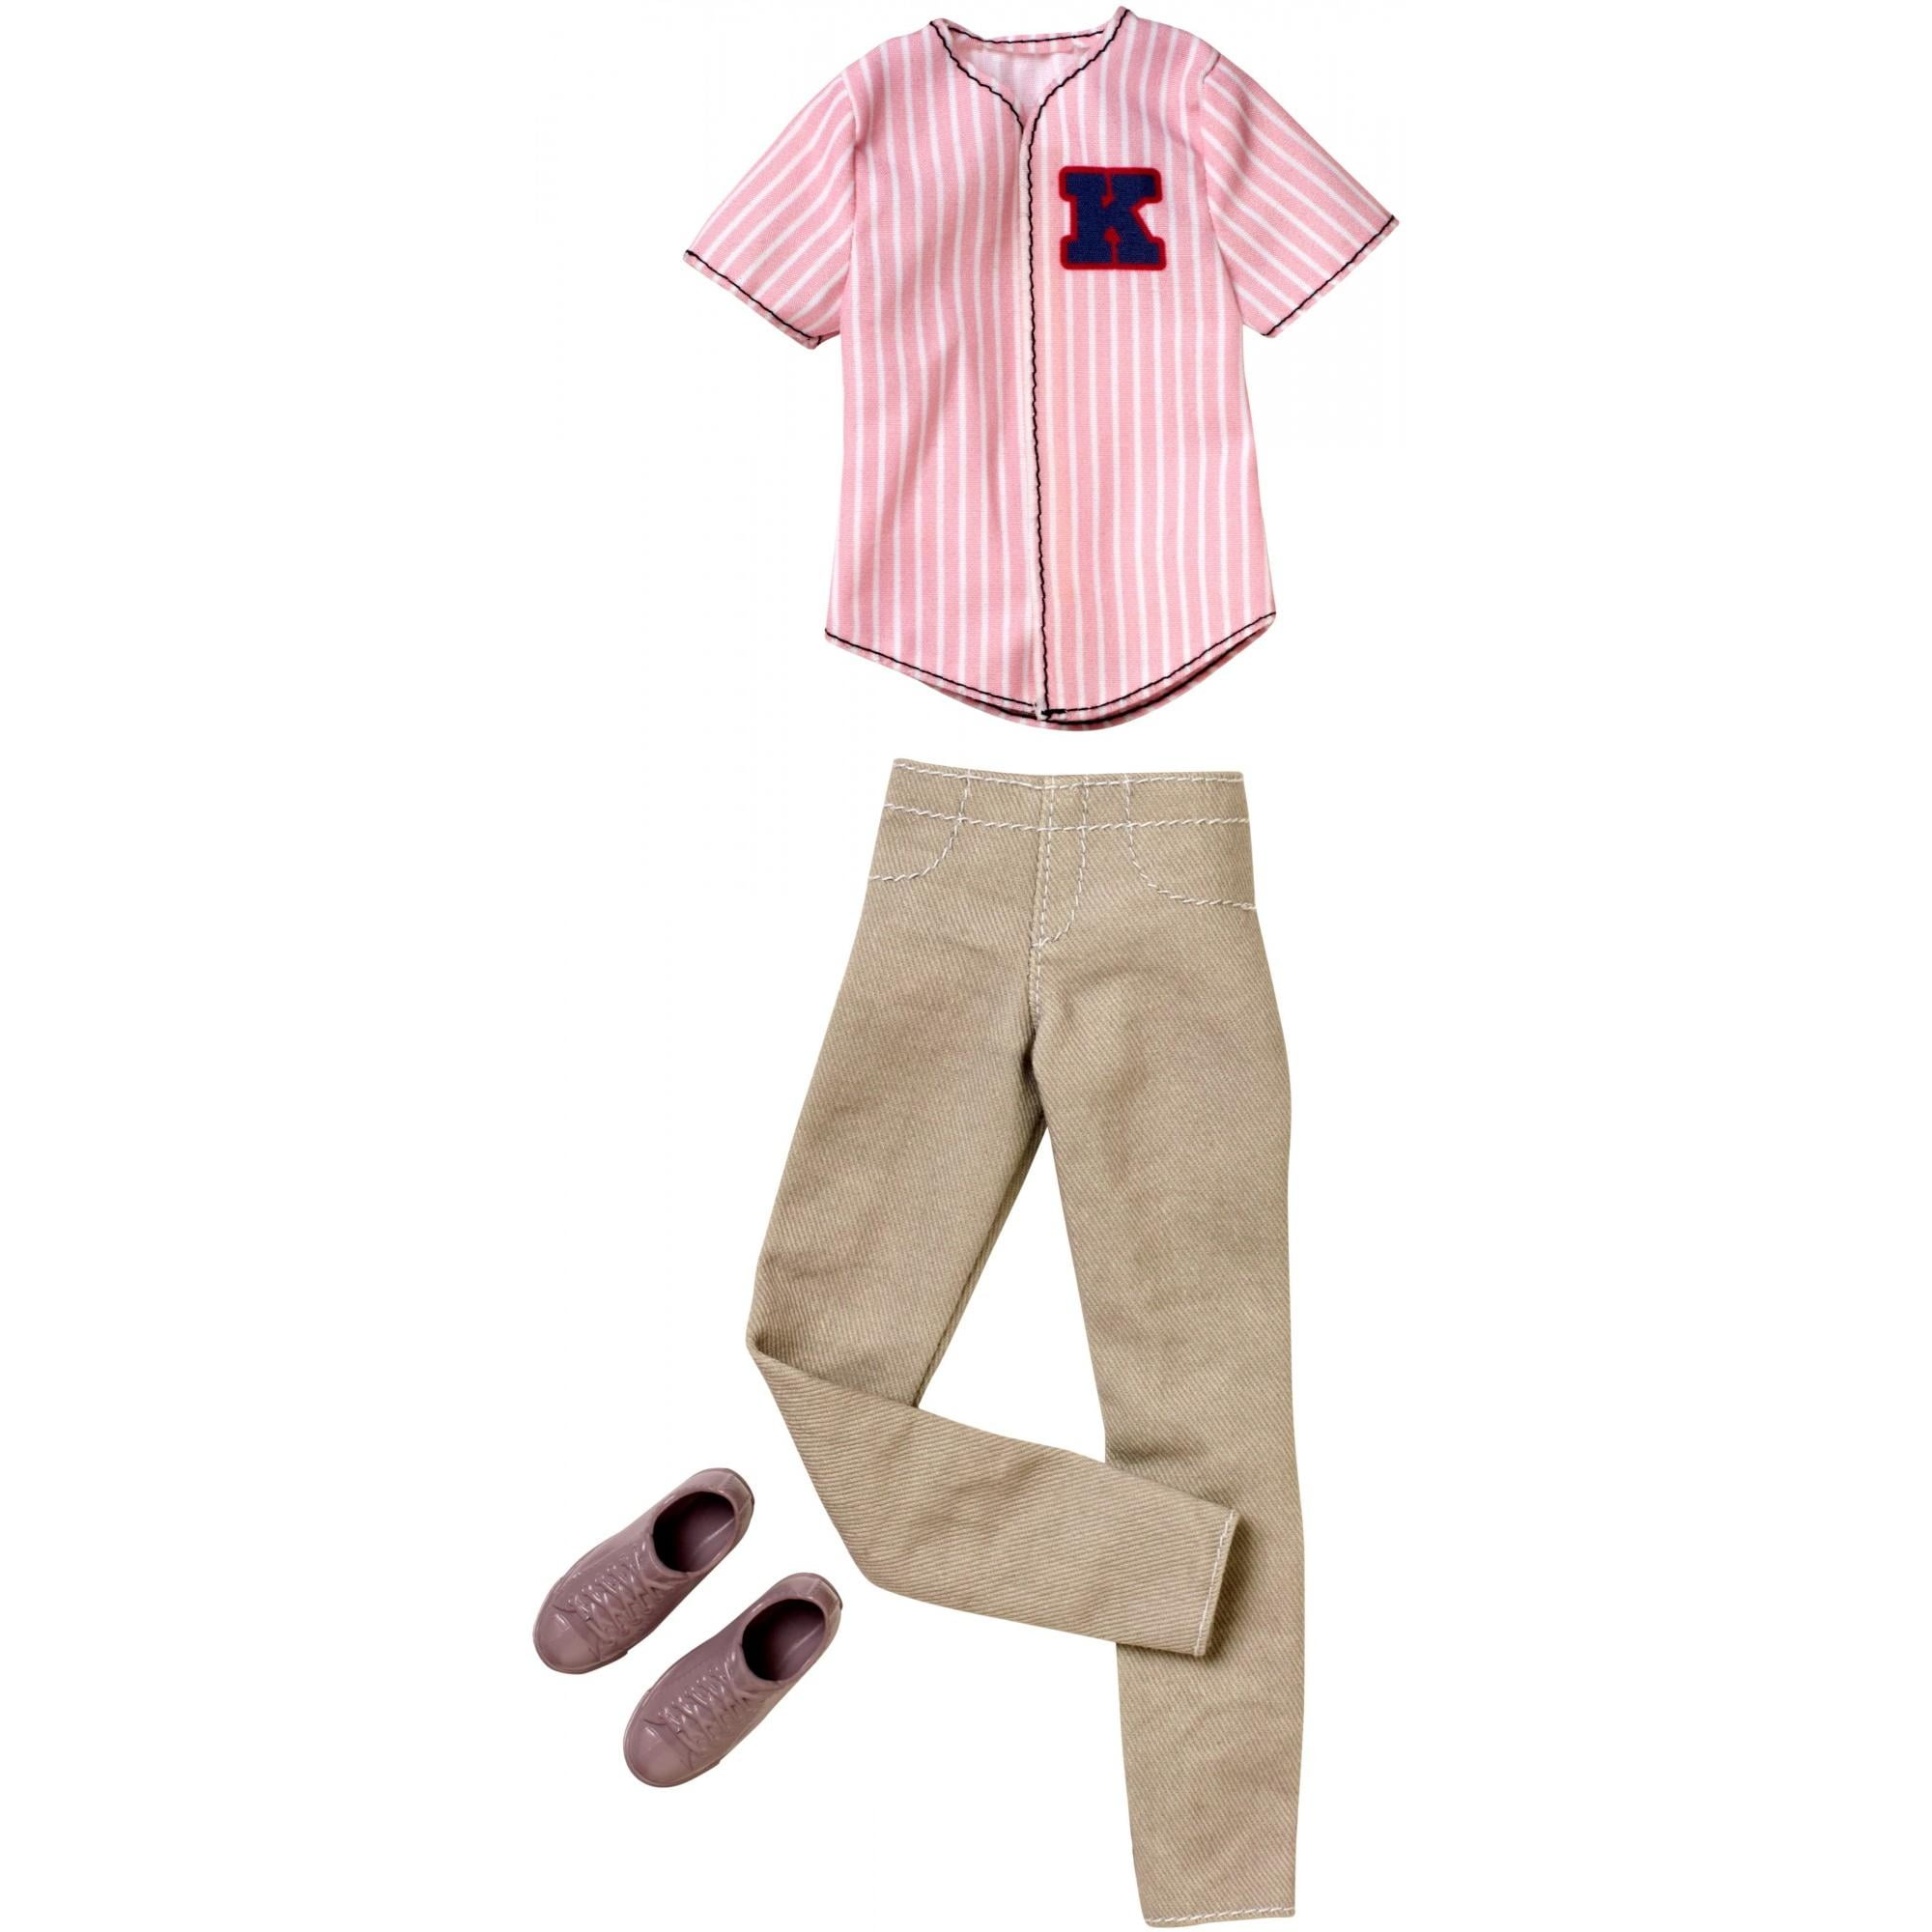 barbie and ken clothes